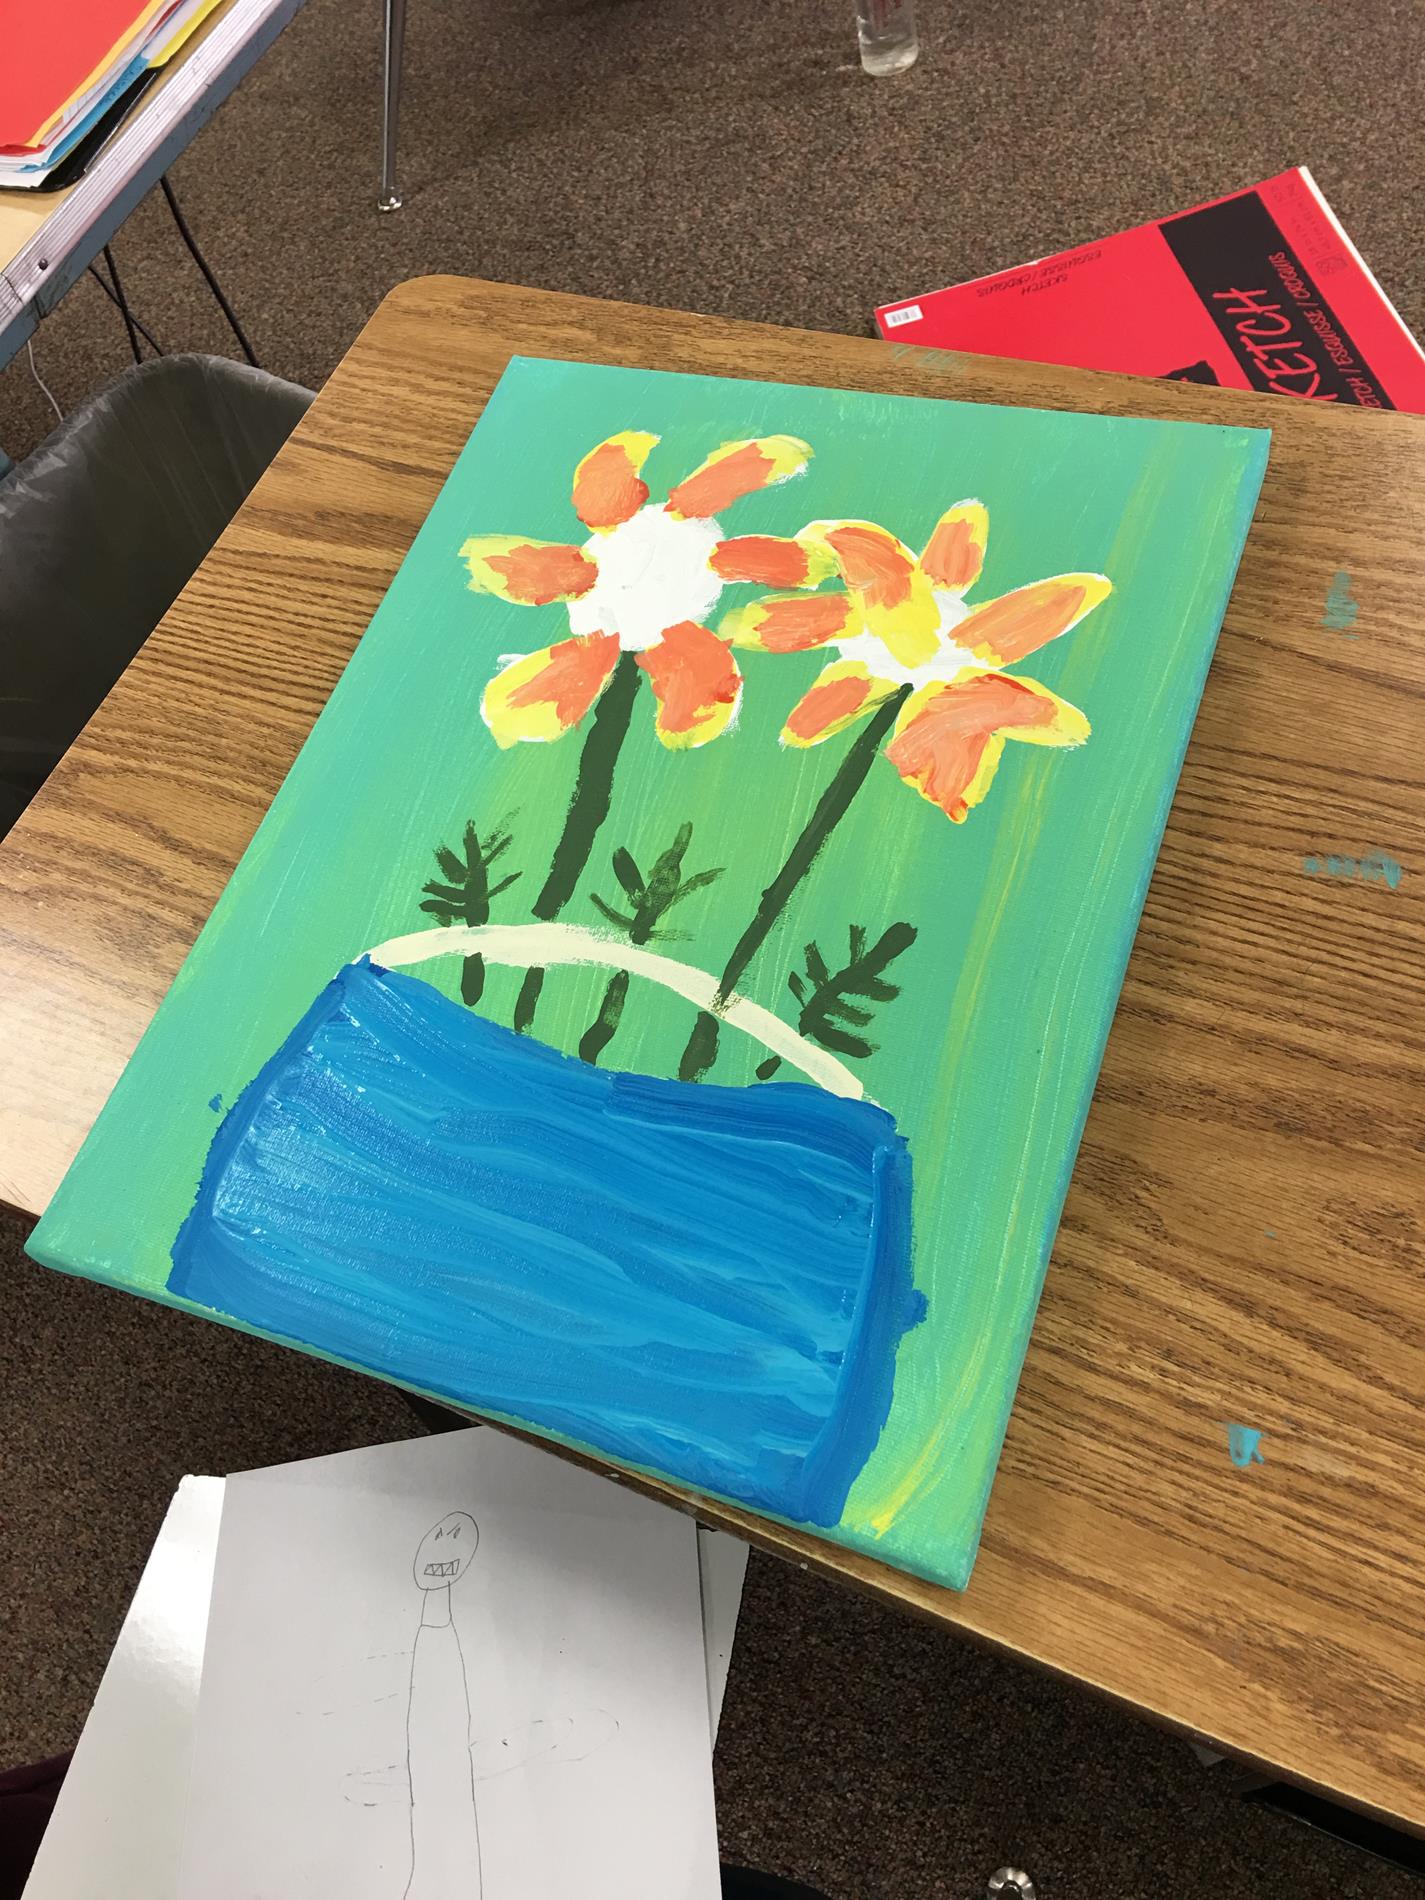 Mrs. Closes class painting flowers in a vase 2018-2019 school year